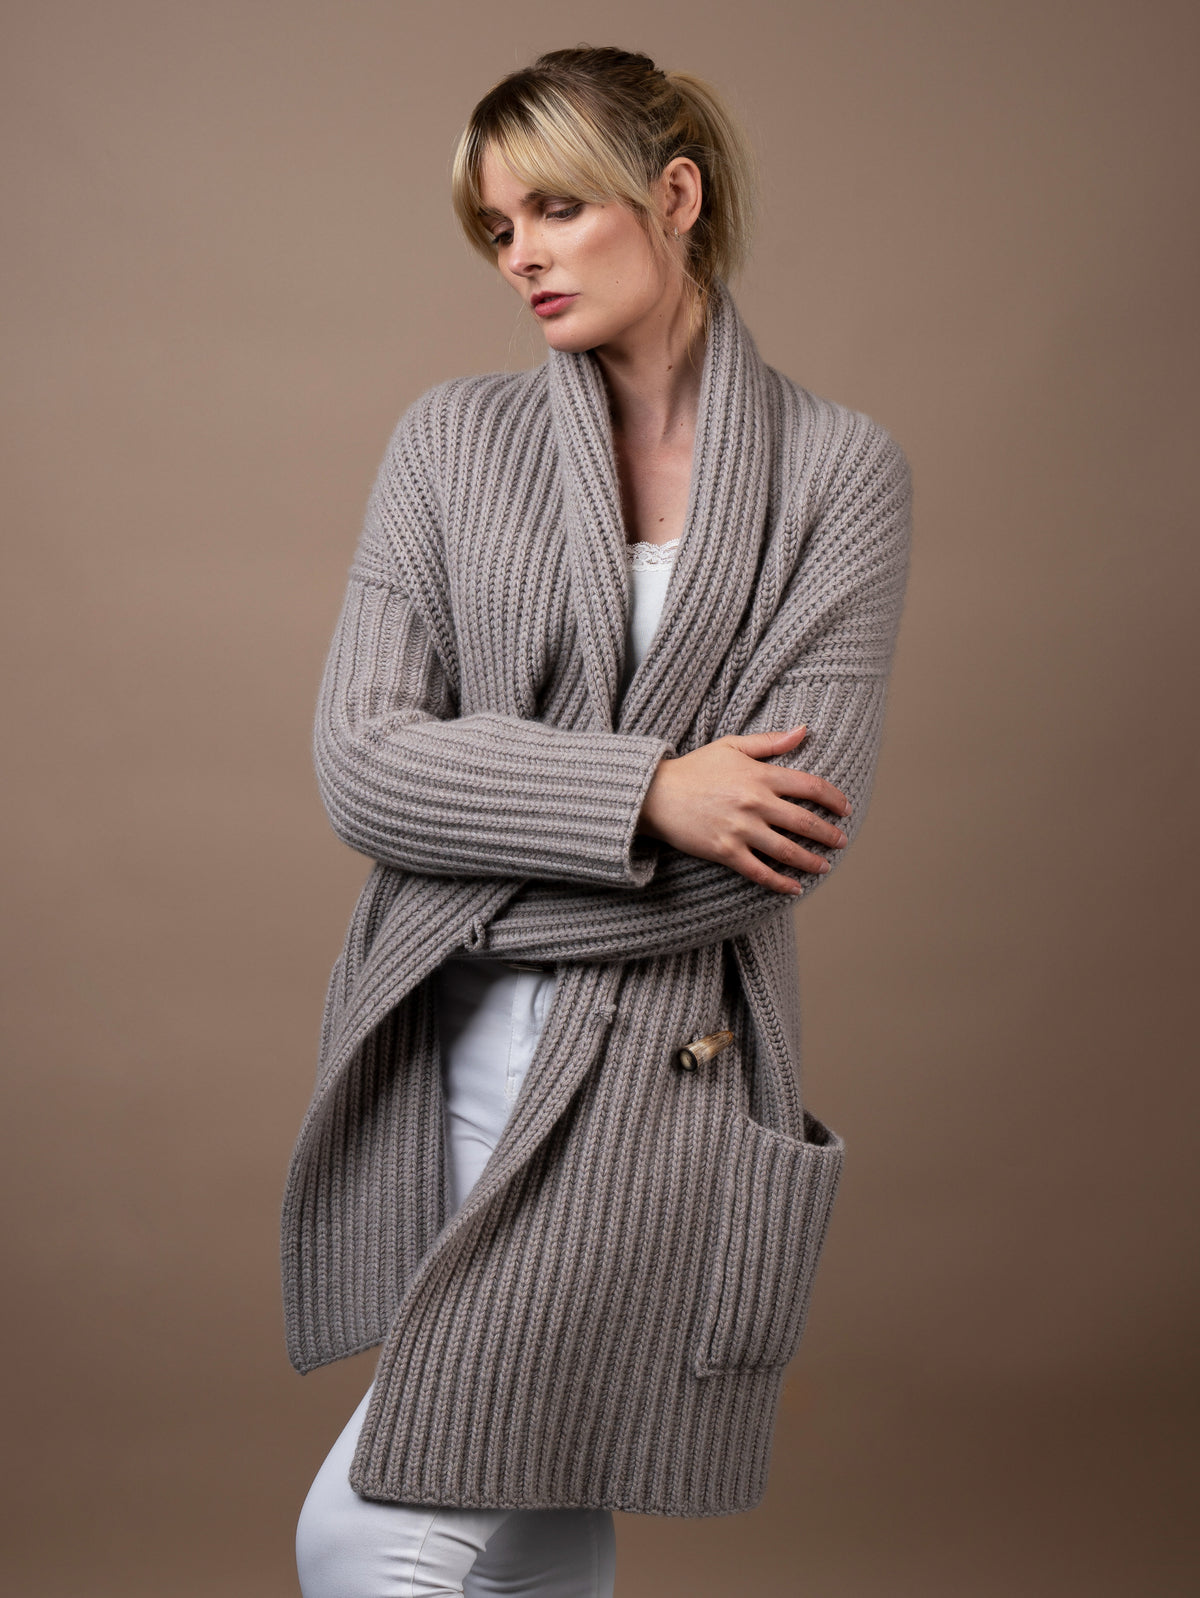 Ladies Cashmere Shawl Cardigan Wrap Jumper in mushroom. 100% cashmere handmade under the Royal Warrant in the UK. This is Cashmere at it&#39;s finest. 